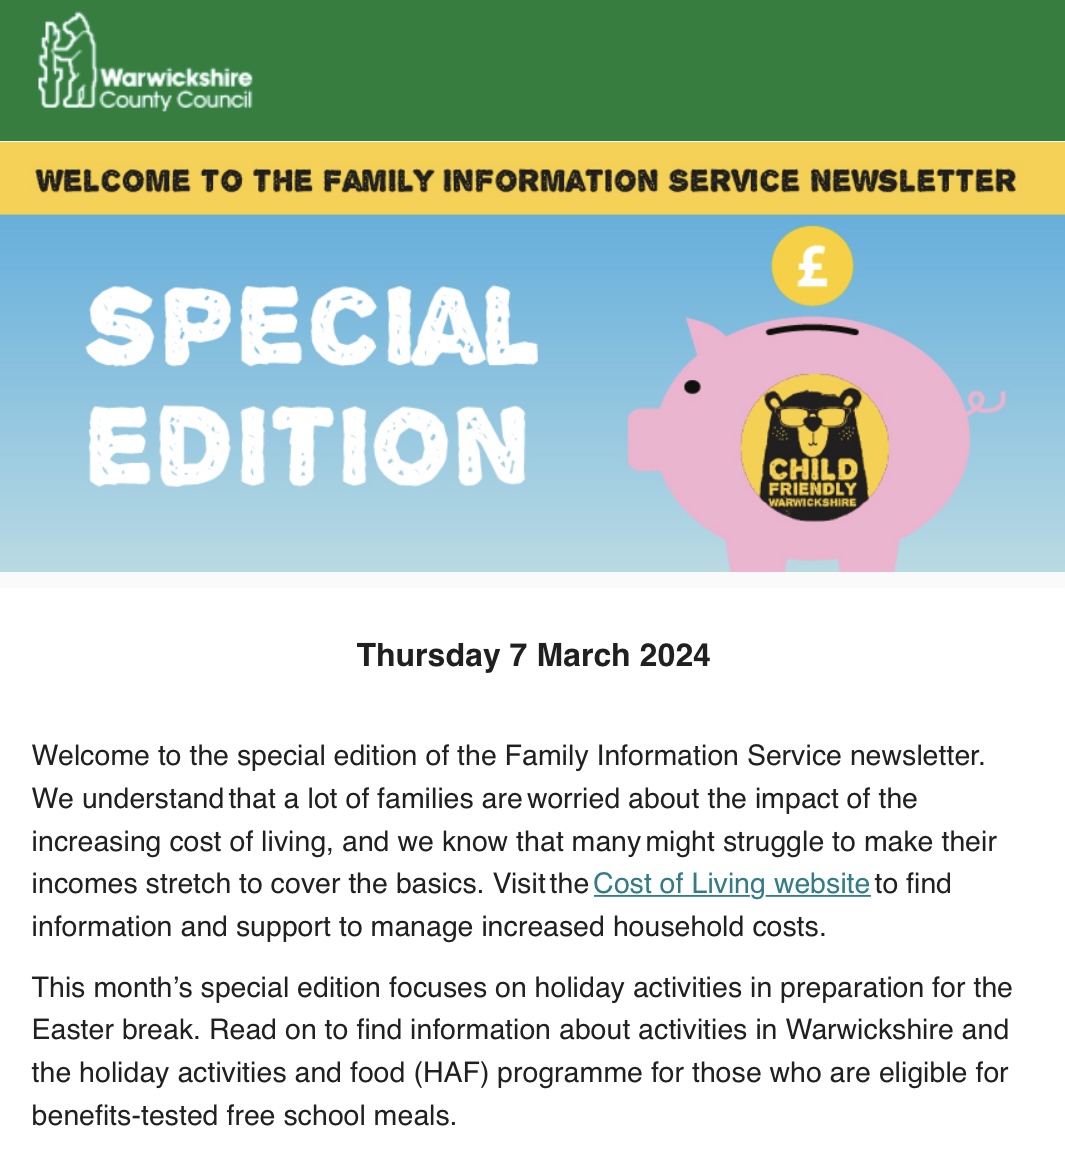 Family Information Service (FIS) Newsletter - Holidays, Activities and Food (HAF) Programme Special Edition